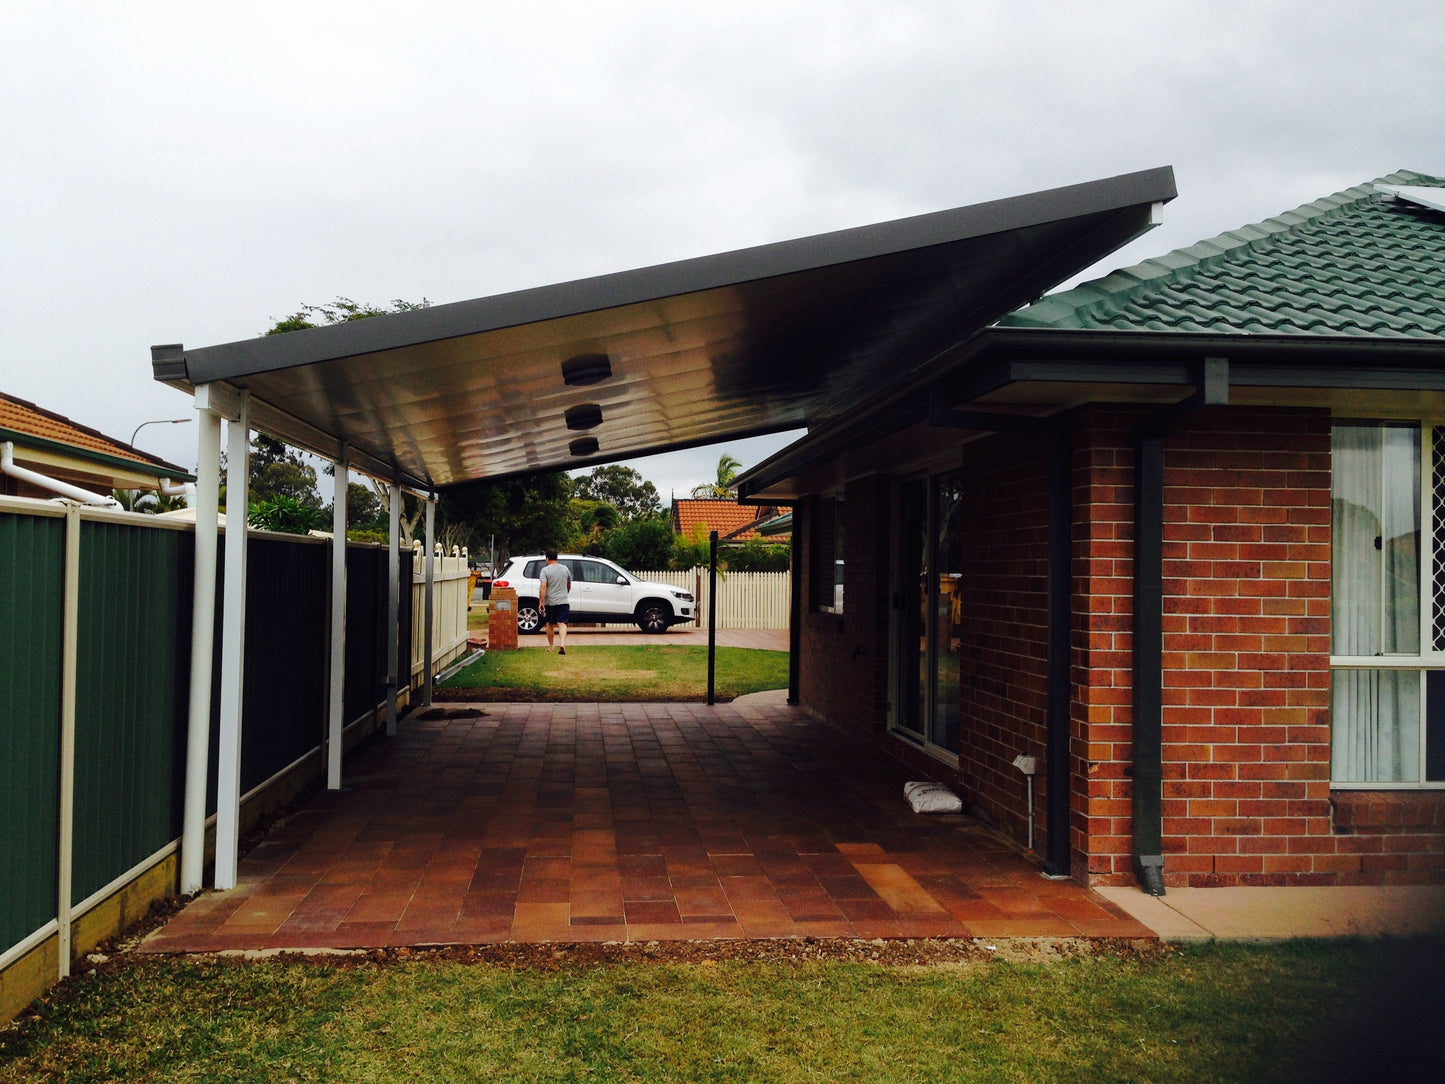 Insulated Flyover Patio Roof- 8m x 4m- Supply & Install QHI National